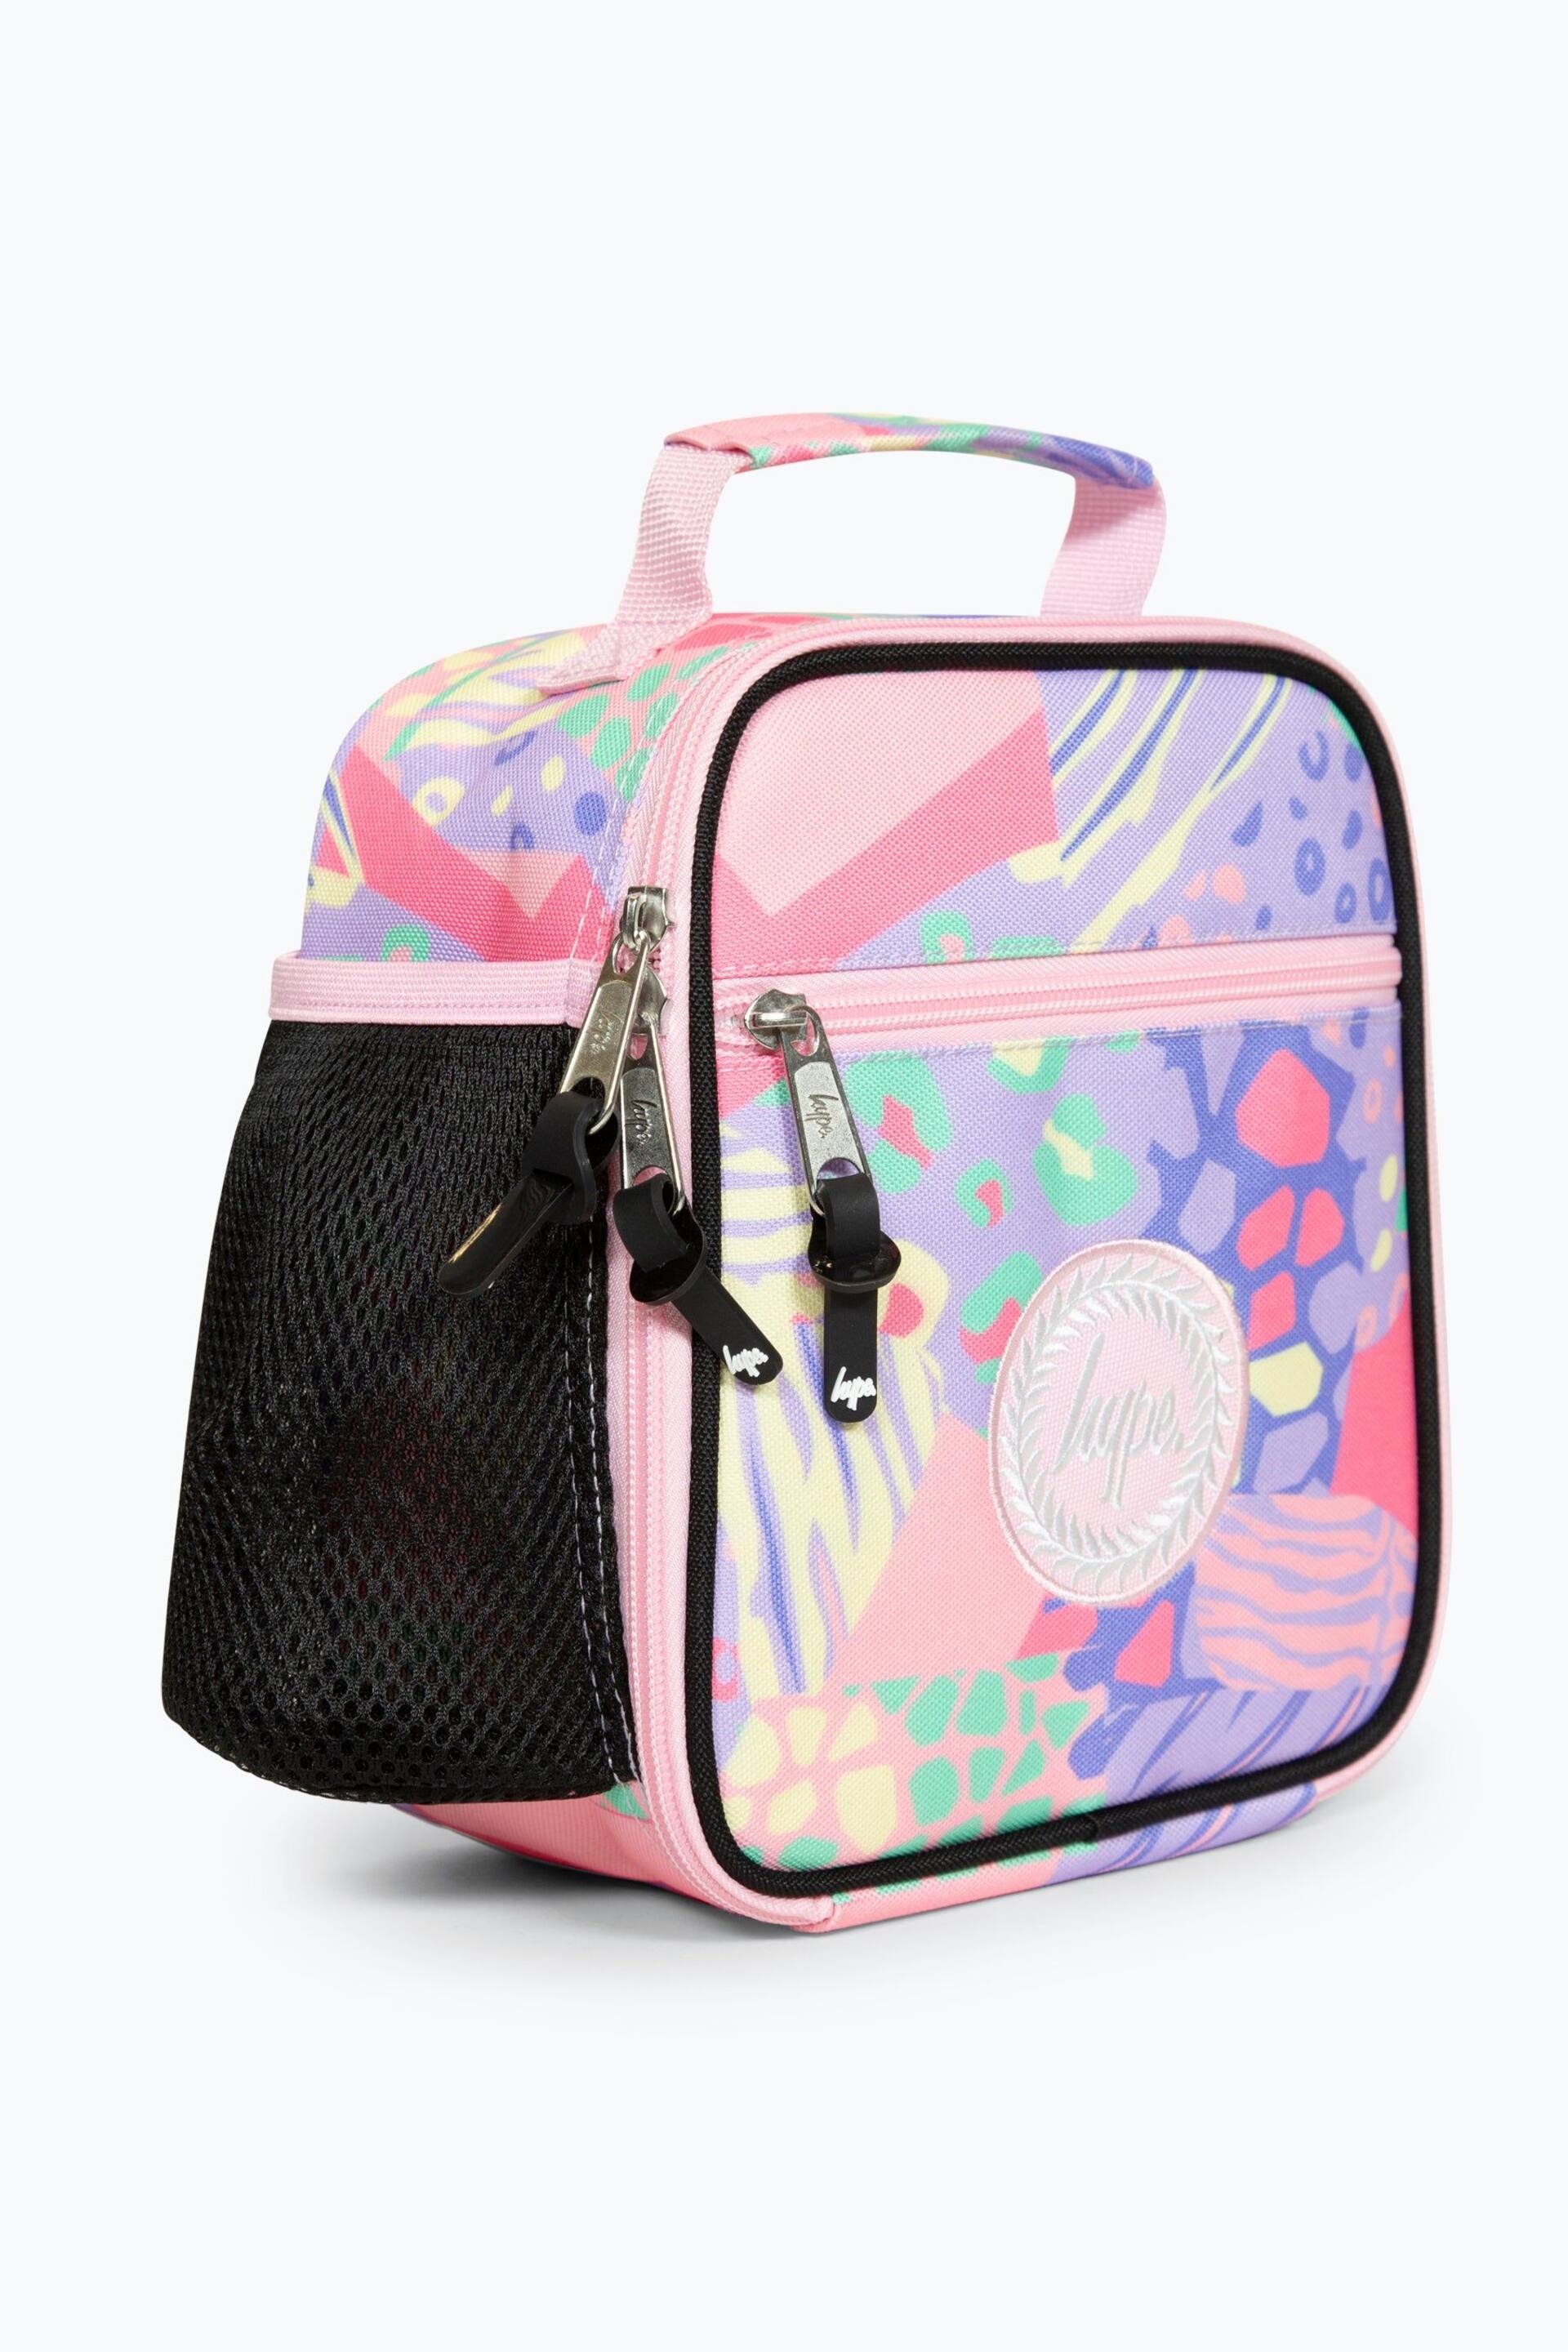 Hype. Multi Pastel Prints Lunch Box - Image 4 of 9